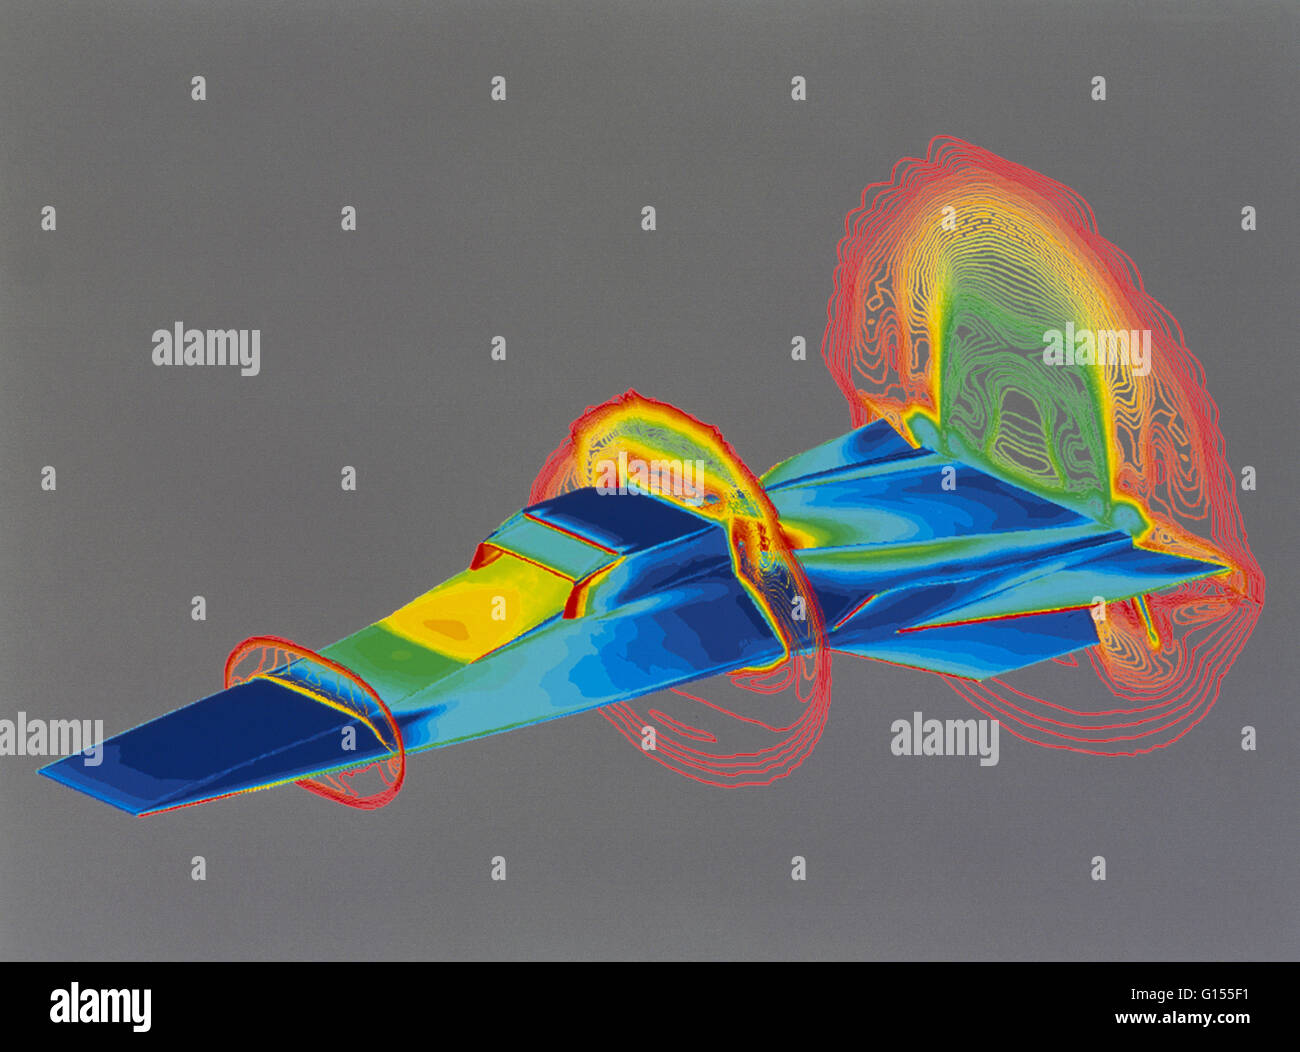 Computer animation of the Hyper-X aircraft, the first jet aircraft designed to fly at more than 5 times the speed of sound, (Mach 5), before launch.  The aerodynamic pressures exerted on the Hyper-X and the air around it in flight are color-coded from red Stock Photo